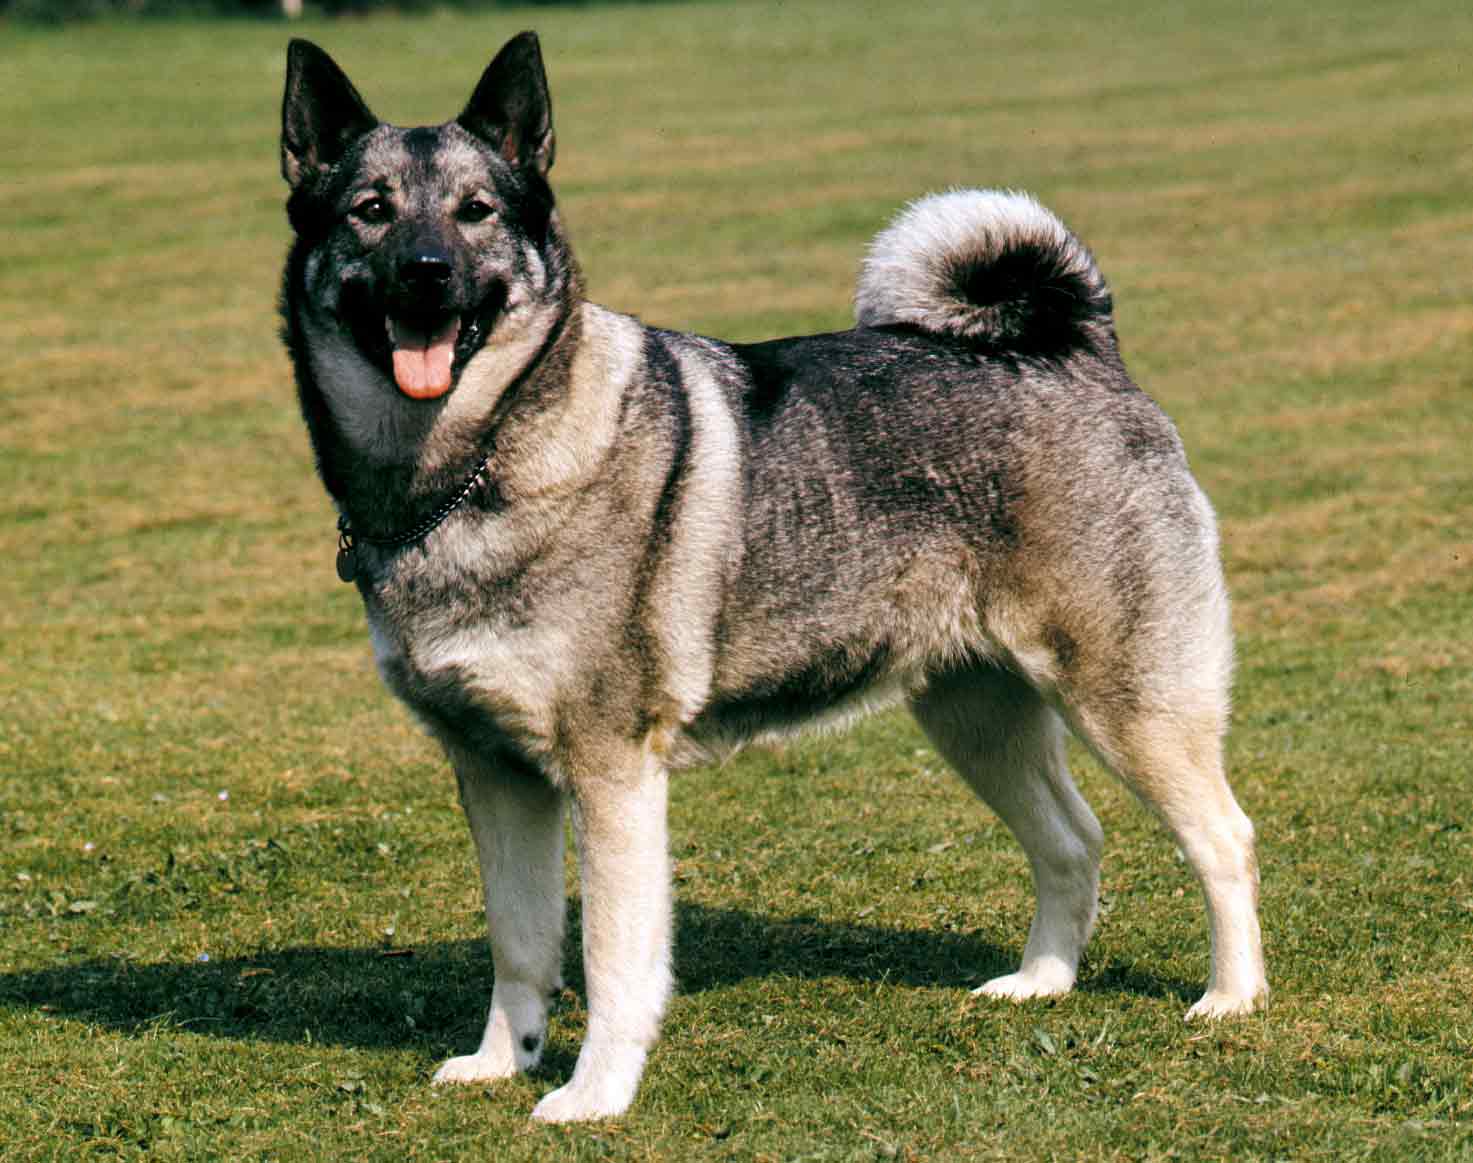 A Norwegian elkhound stands on a lawn.